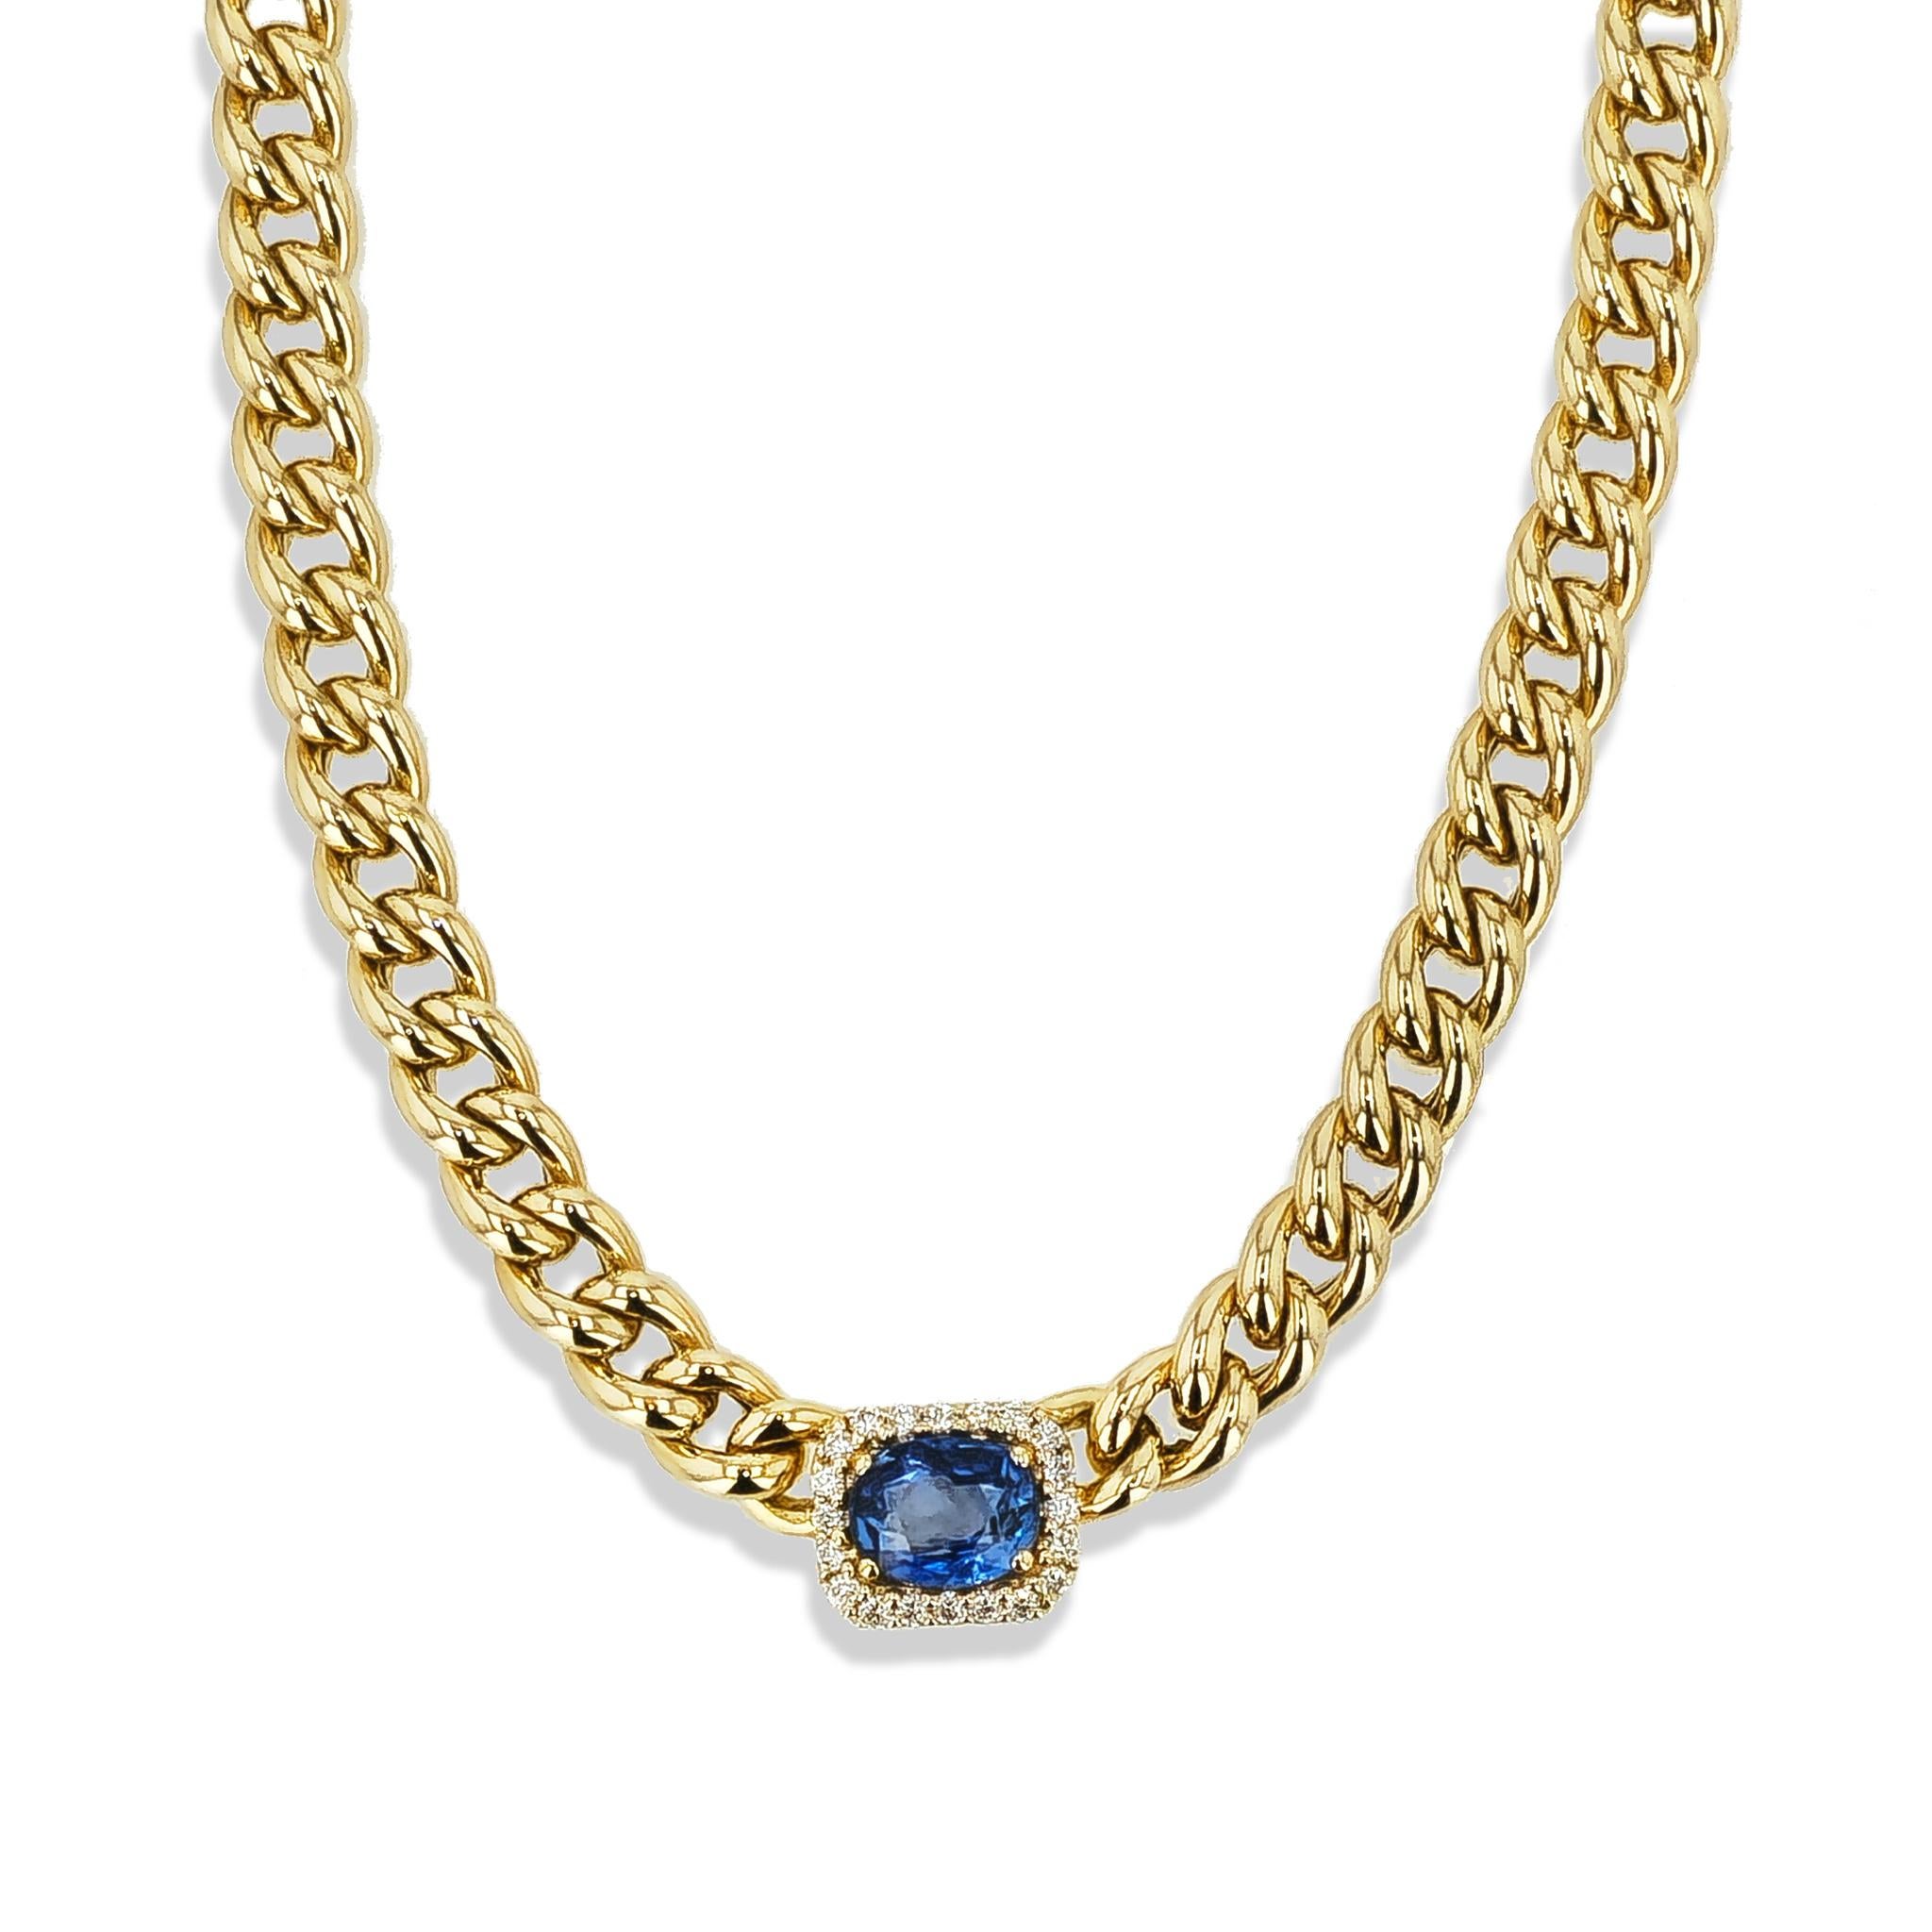 Oval Sapphire Diamond Pave 18 karat Yellow Gold Necklace In New Condition For Sale In Miami, FL